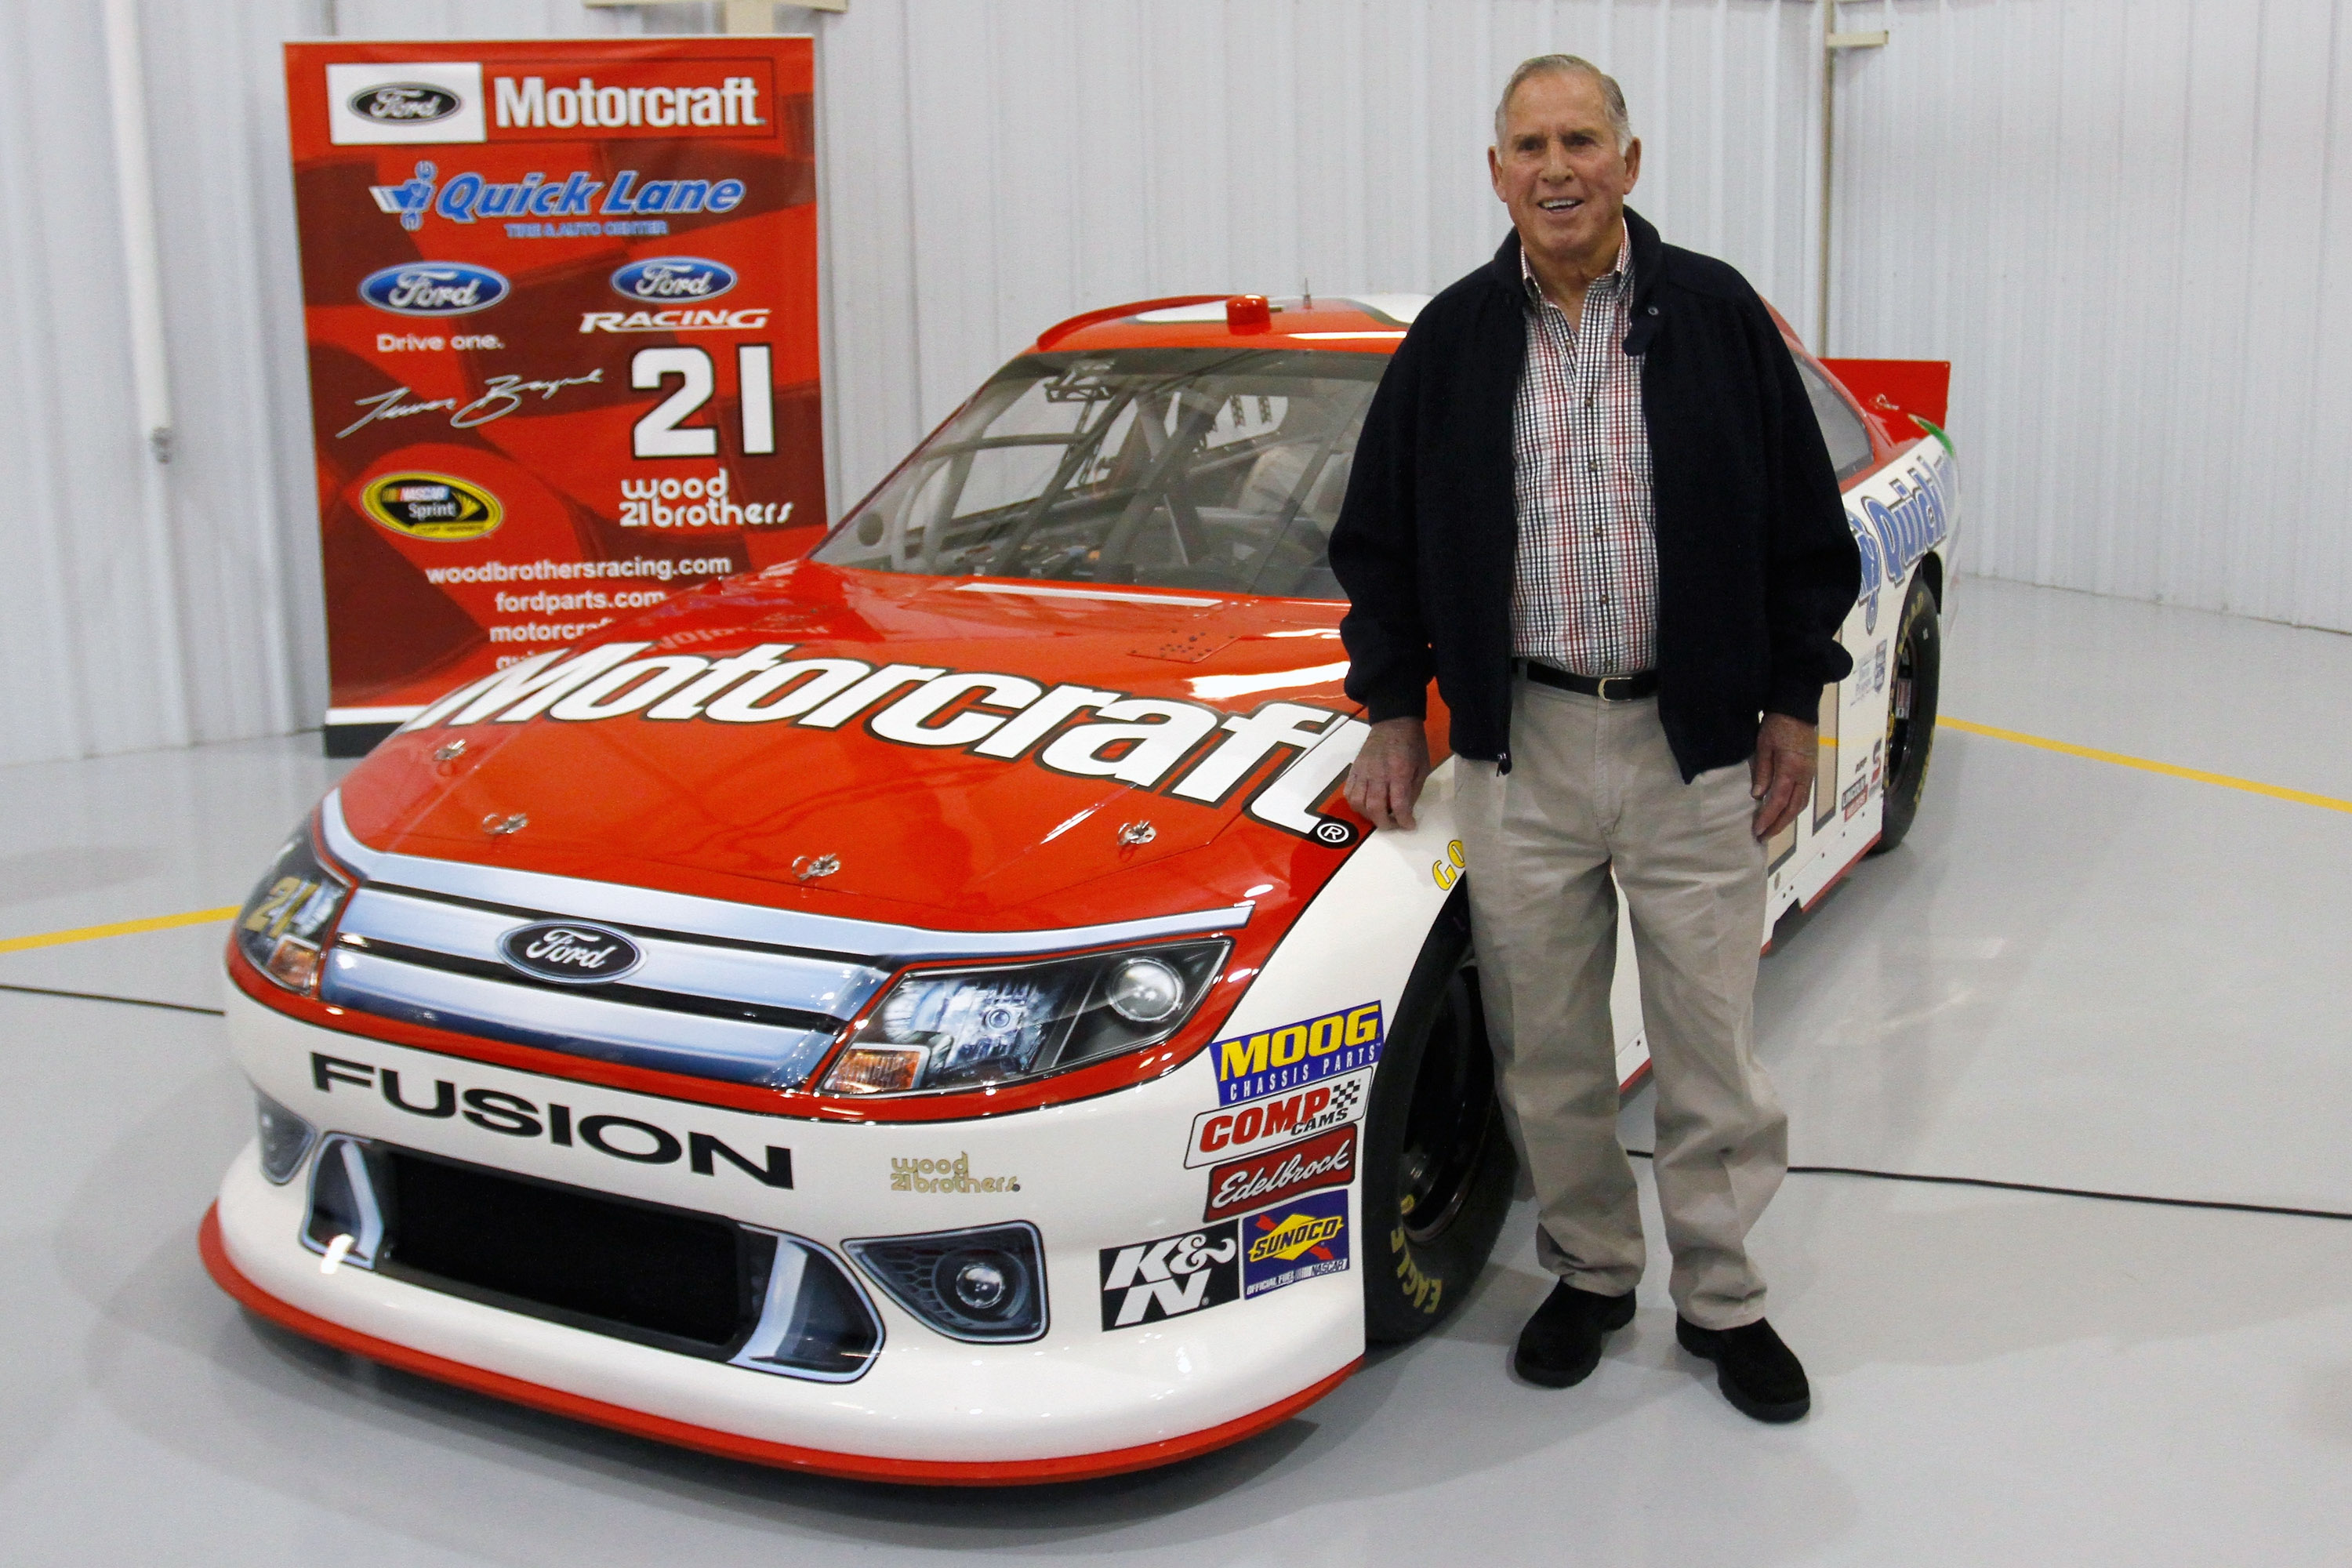 CONCORD, NC - JANUARY 27:  NASCAR Hall of Fame inductee David Pearson poses with the #21 Motorcraft Ford during the NASCAR Sprint Media Tour hosted by Charlotte Motor Speedway, held at the Roush-Fenway hanger of Concord Regional Airport, on January 27, 20